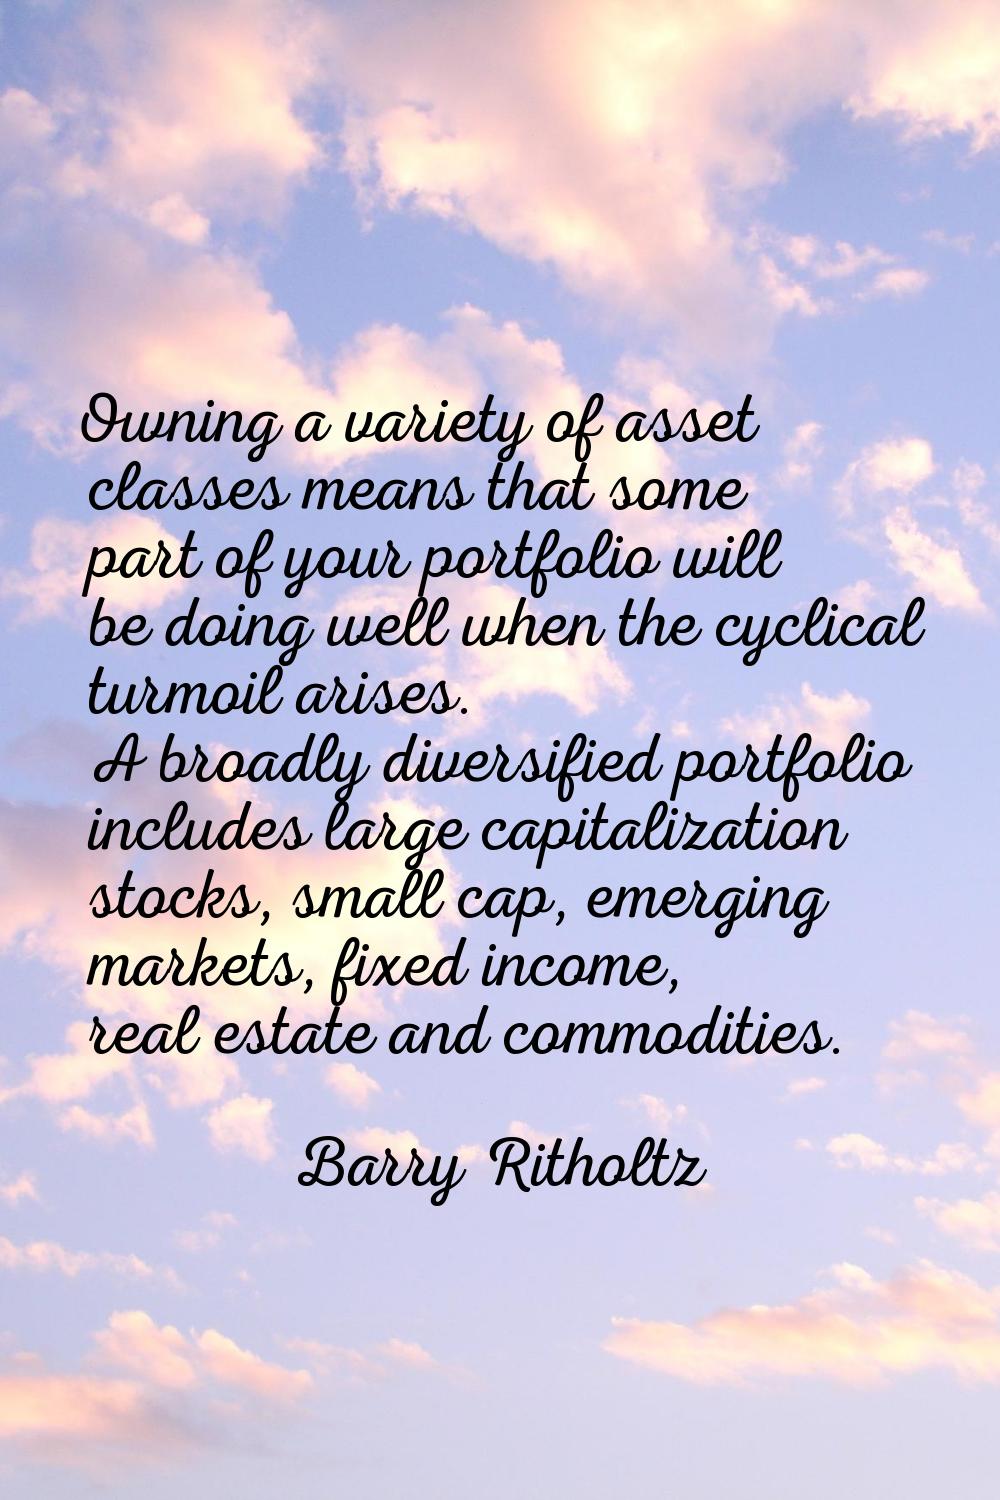 Owning a variety of asset classes means that some part of your portfolio will be doing well when th